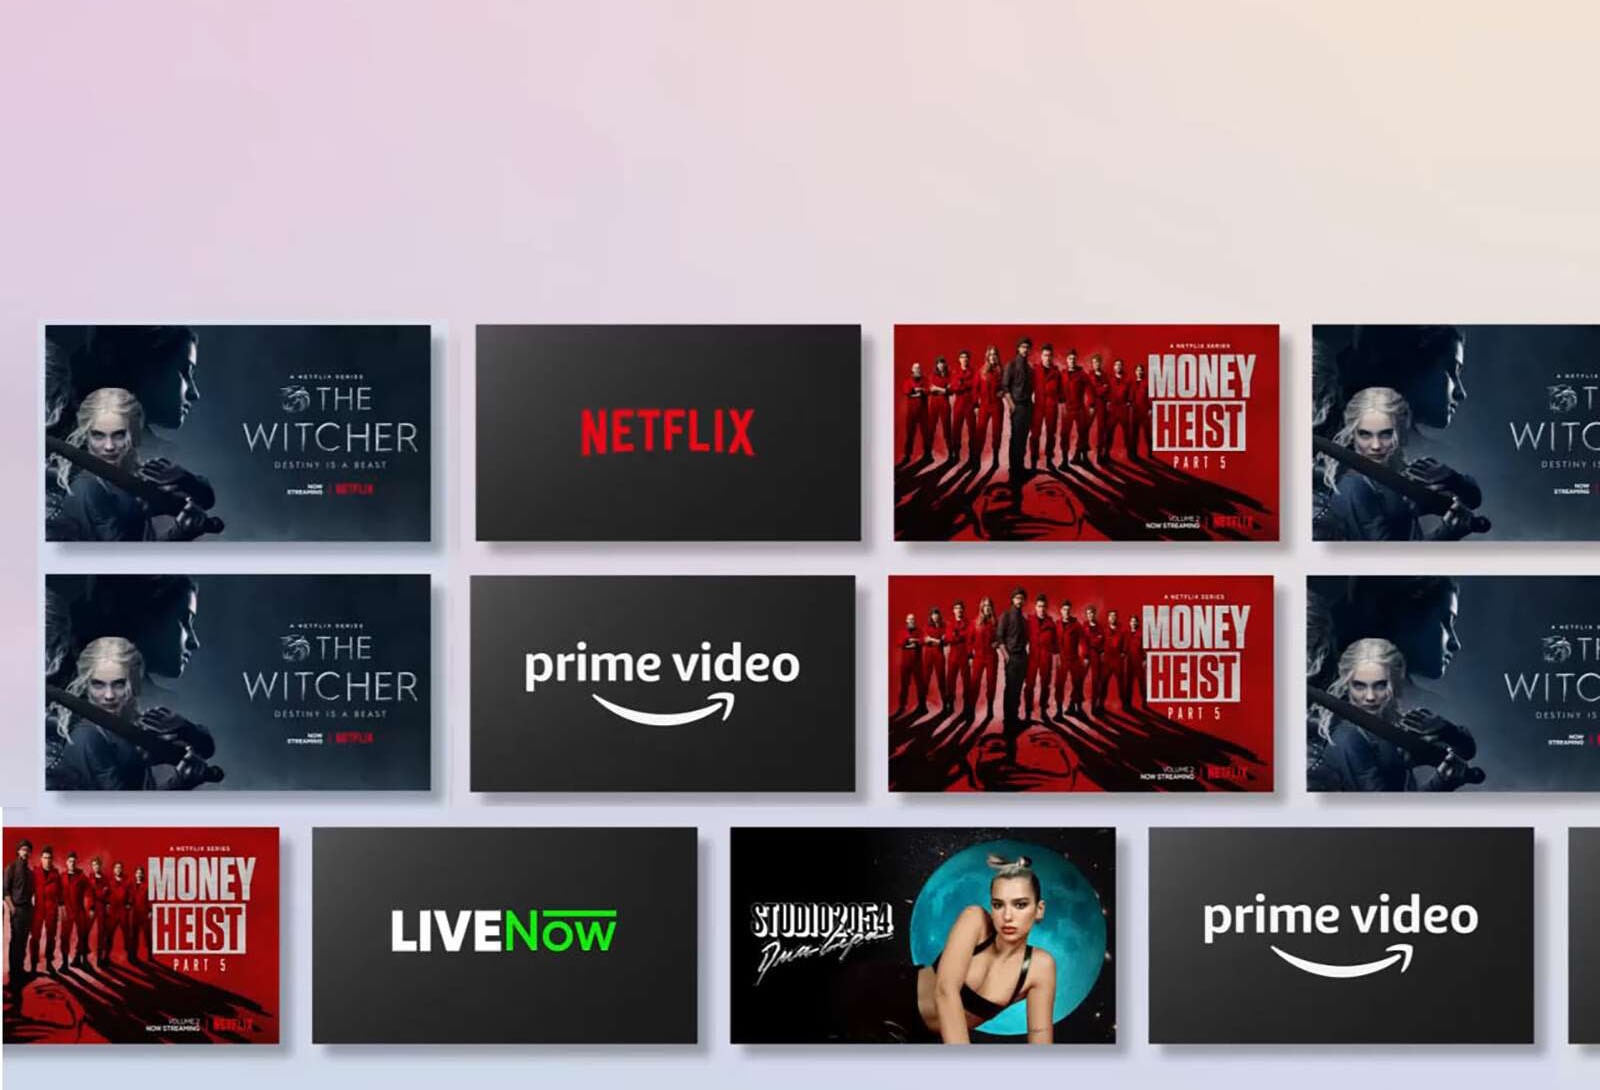 Rows of OTT content side-scrolls while displaying the OTT provider logo and the thumbnails of content offered.